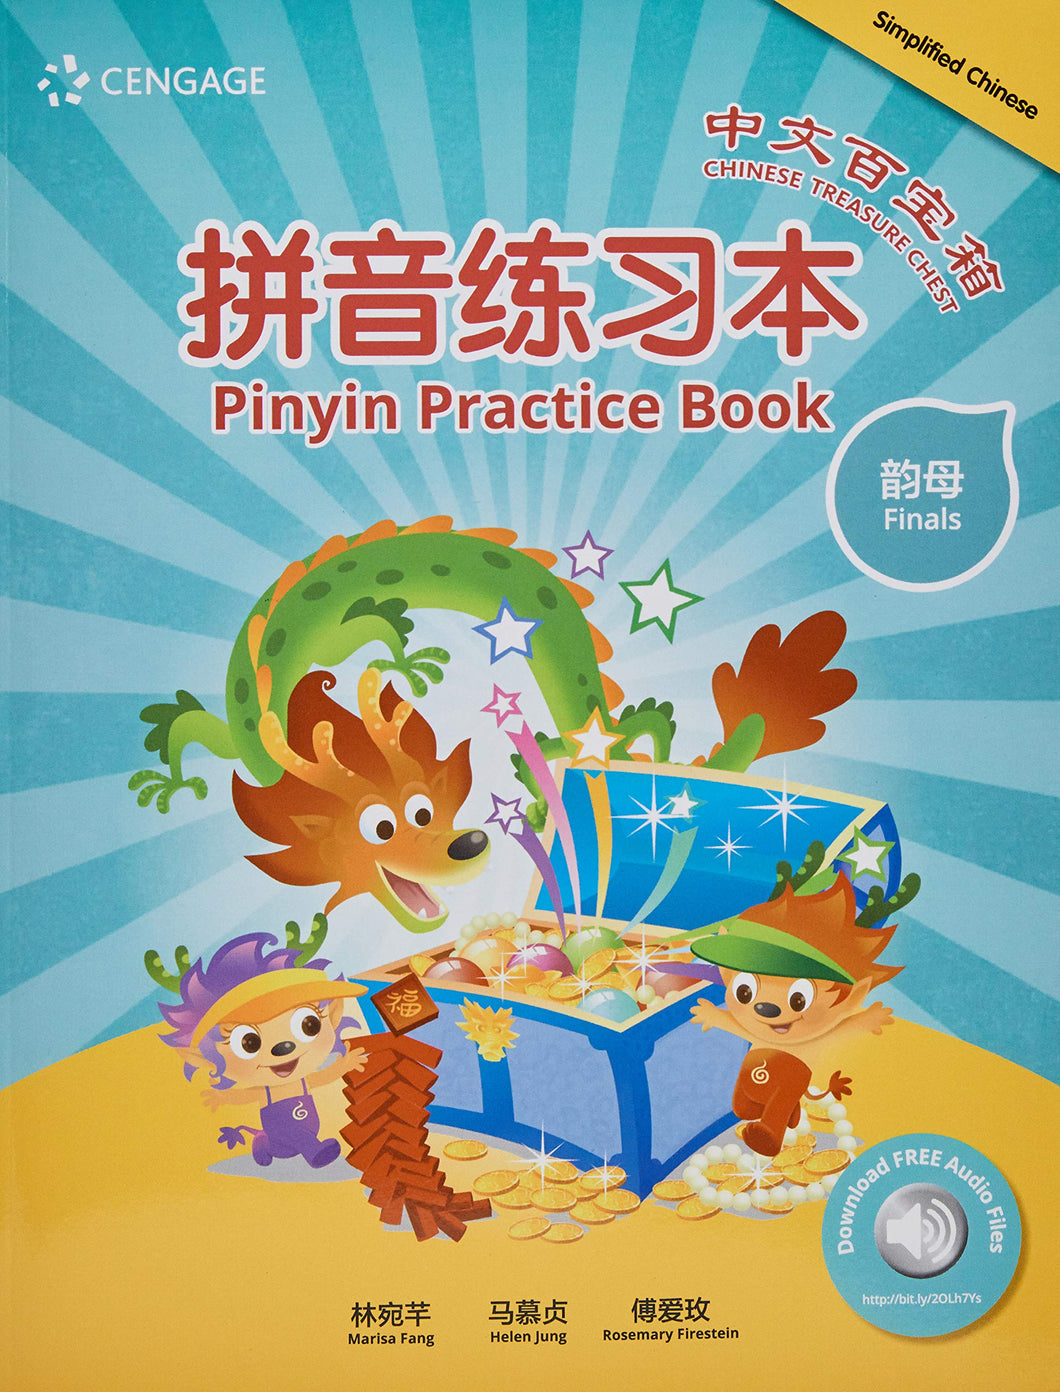 Pinyin Practice Book-Finals(Simplified Chinese)拼音文字練習本/韻母